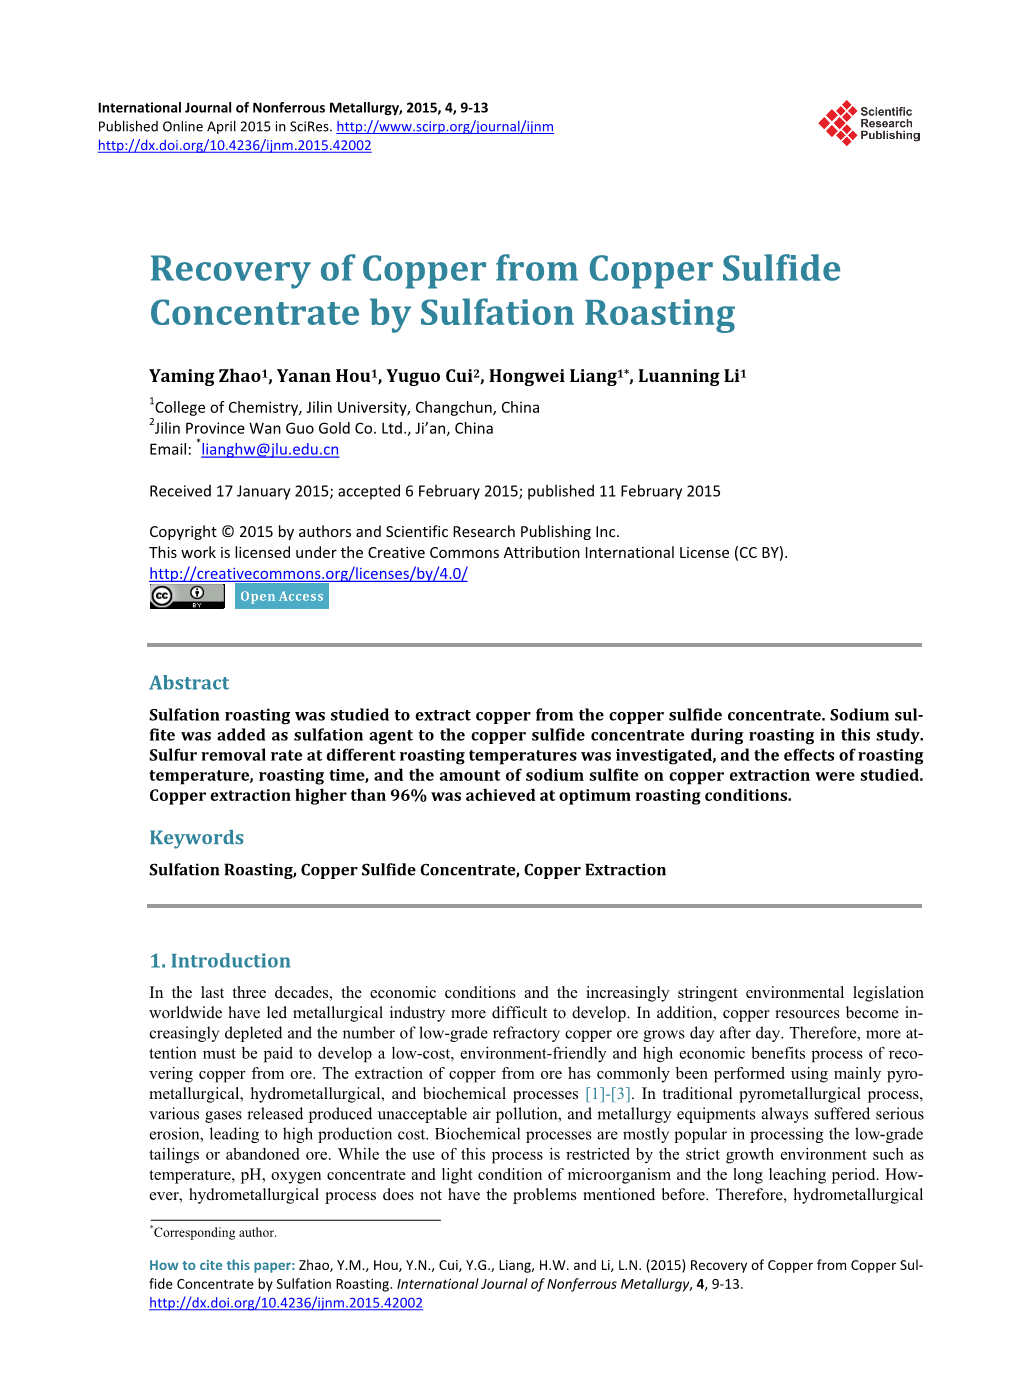 Recovery of Copper from Copper Sulfide Concentrate by Sulfation Roasting